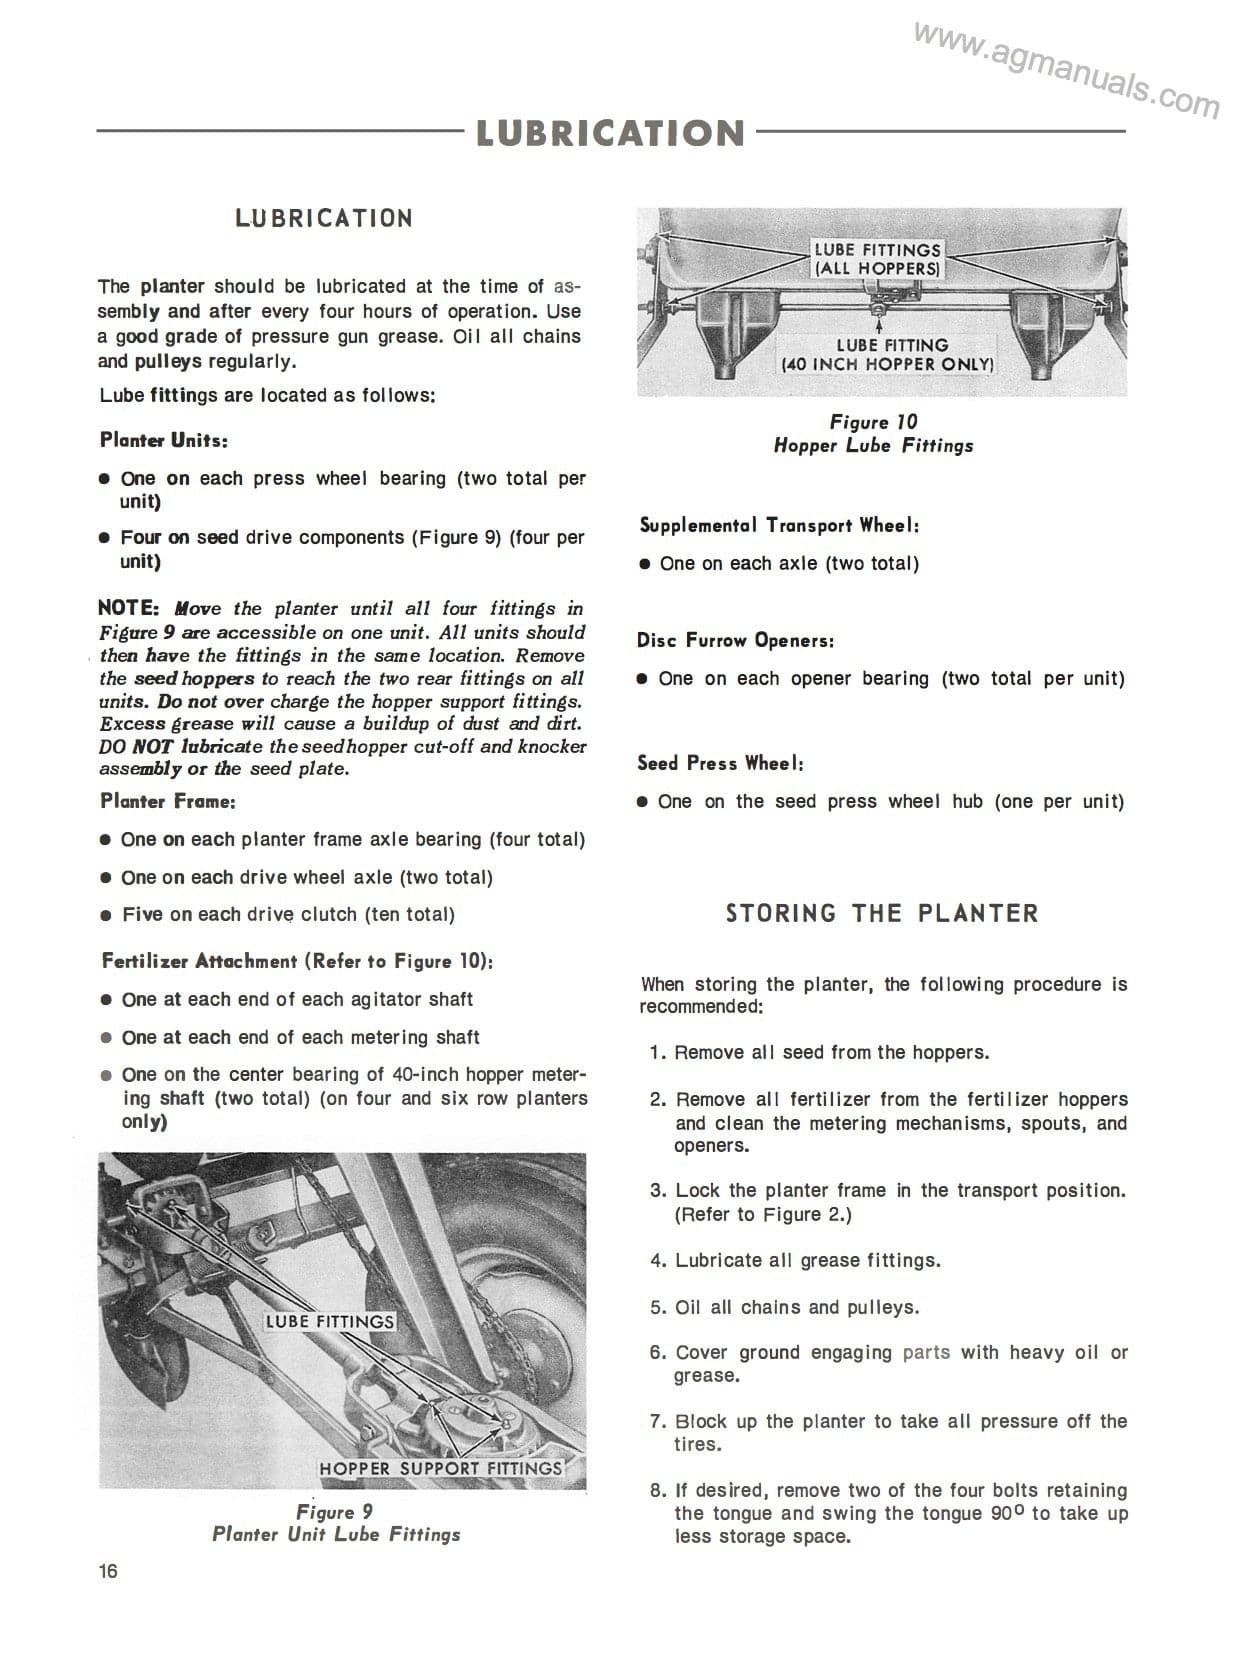 Ford Series 320 Pull-Type Planter - Operator's Manual - Ag Manuals - A Provider of Digital Farm Manuals - 3